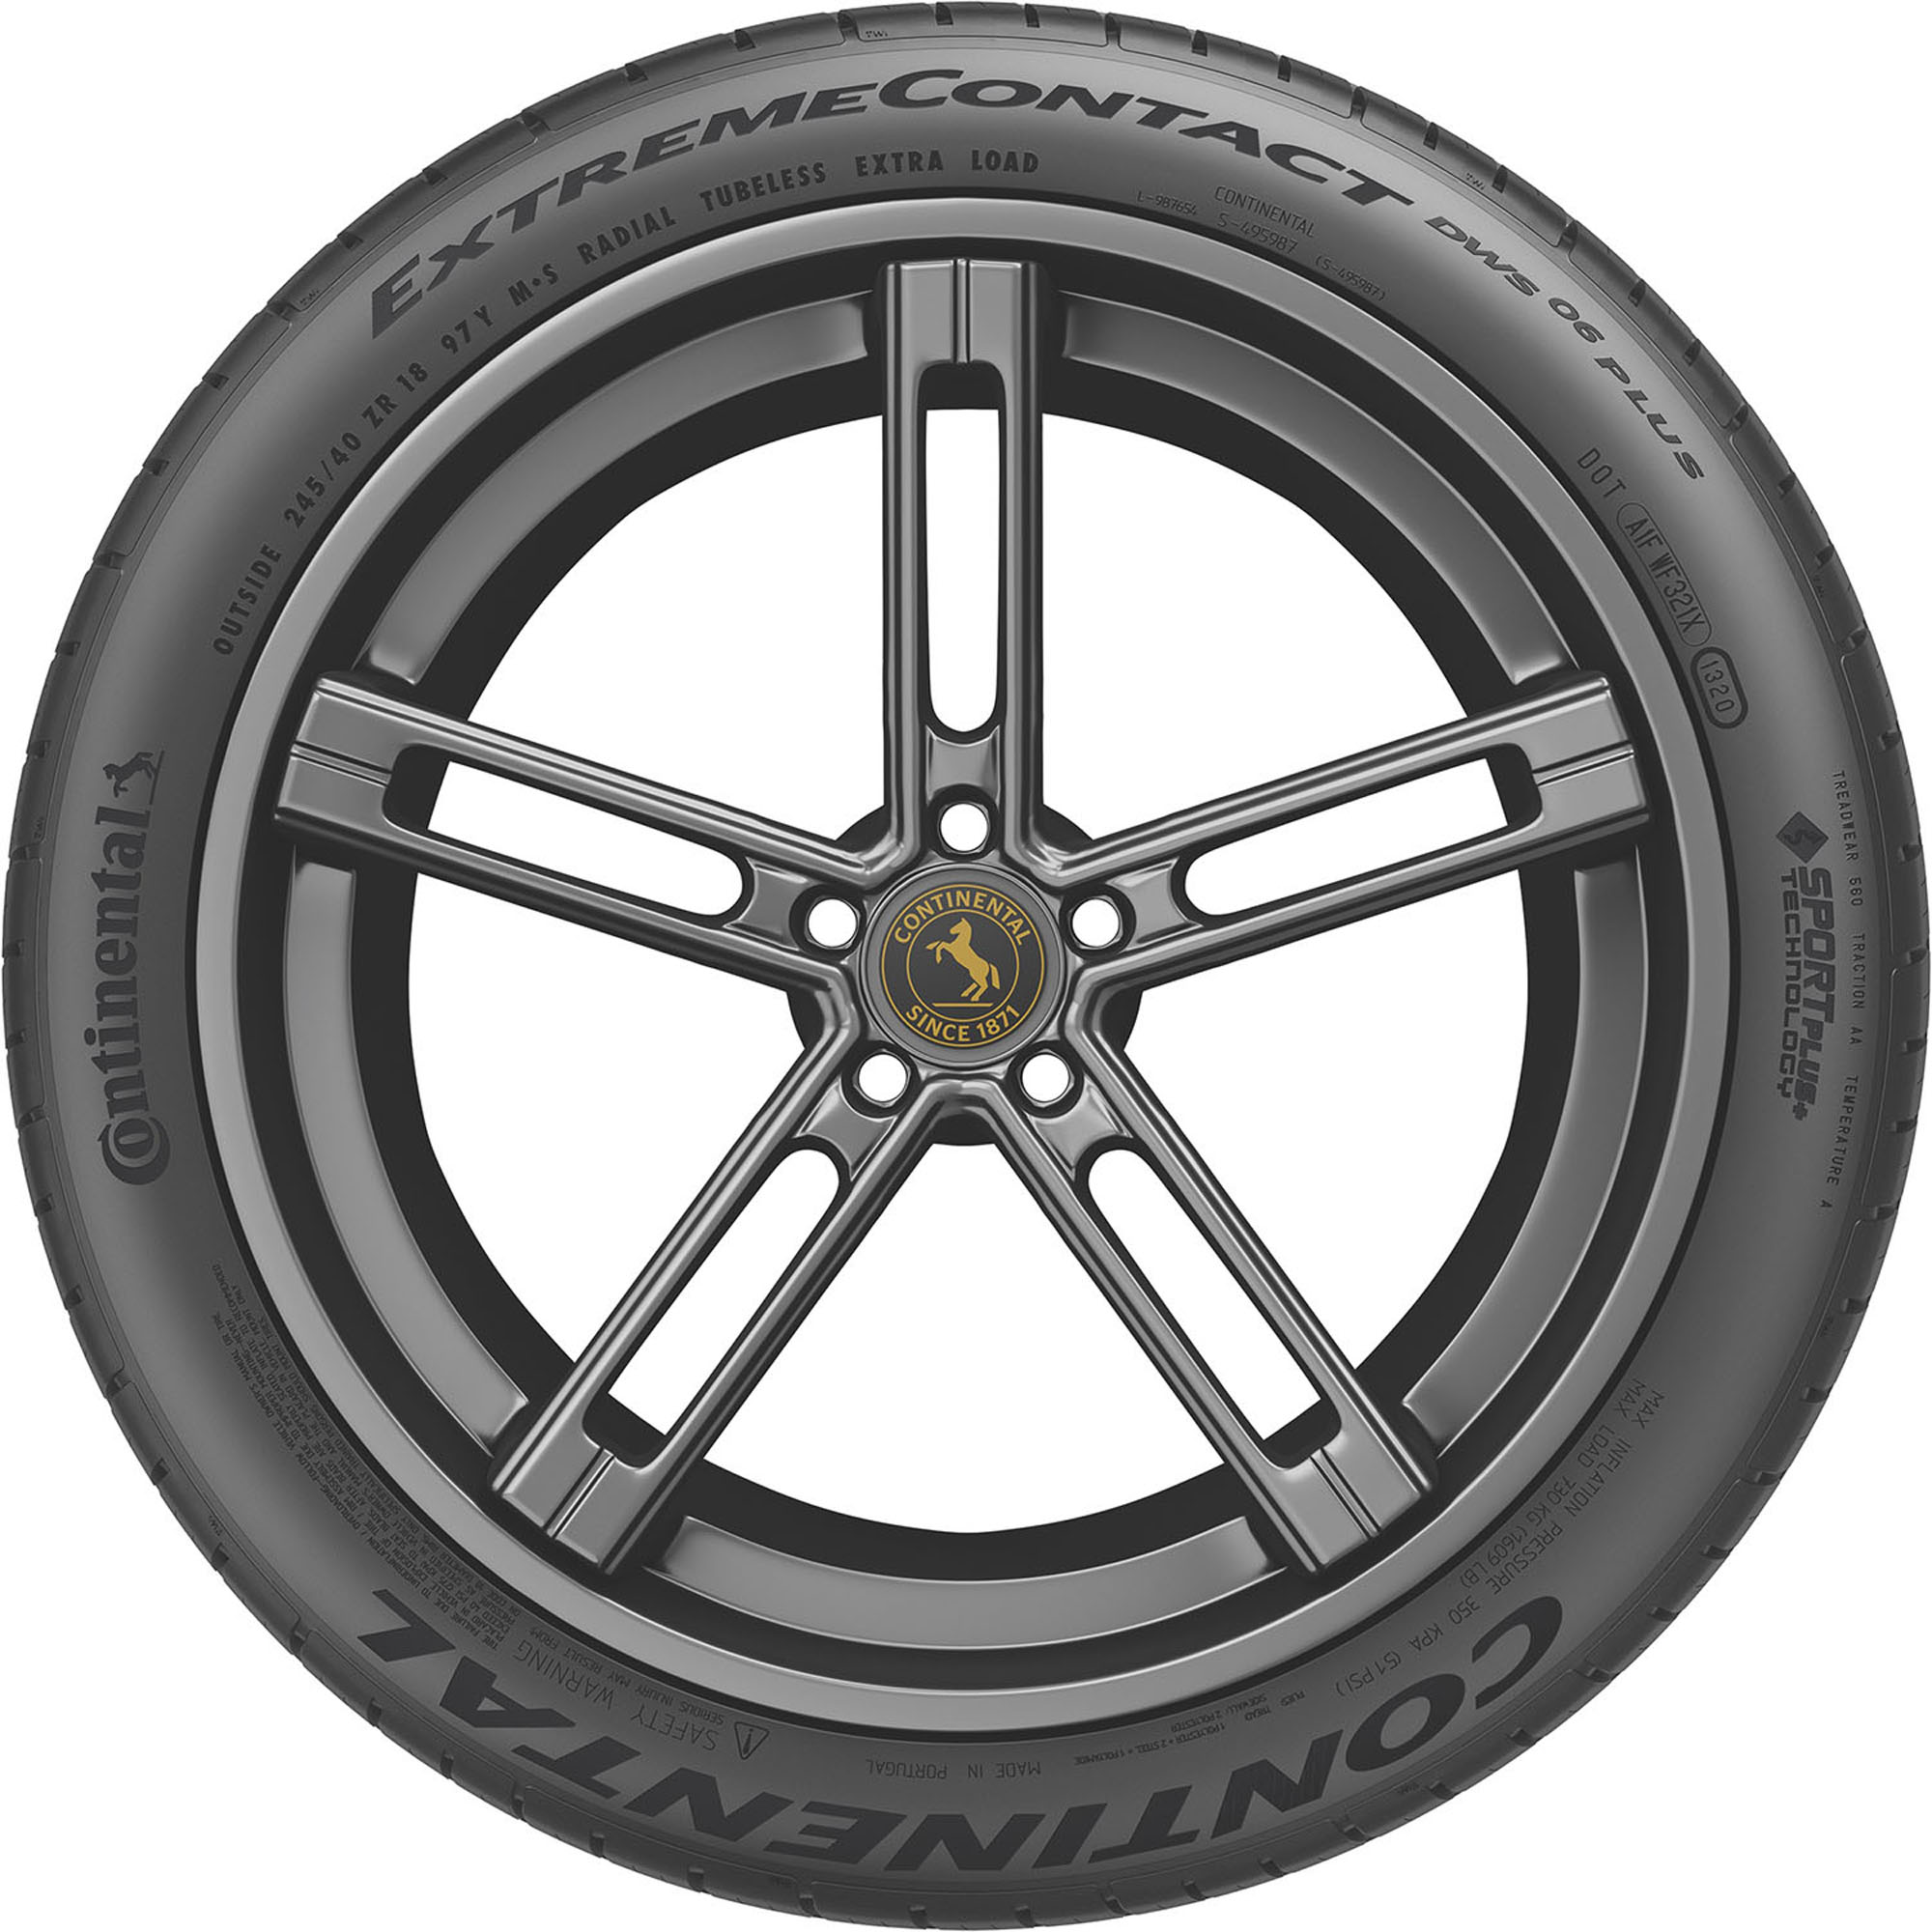 Continental ExtremeContact DWS06 PLUS UHP All Season 225/55ZR17 97W  Passenger Tire